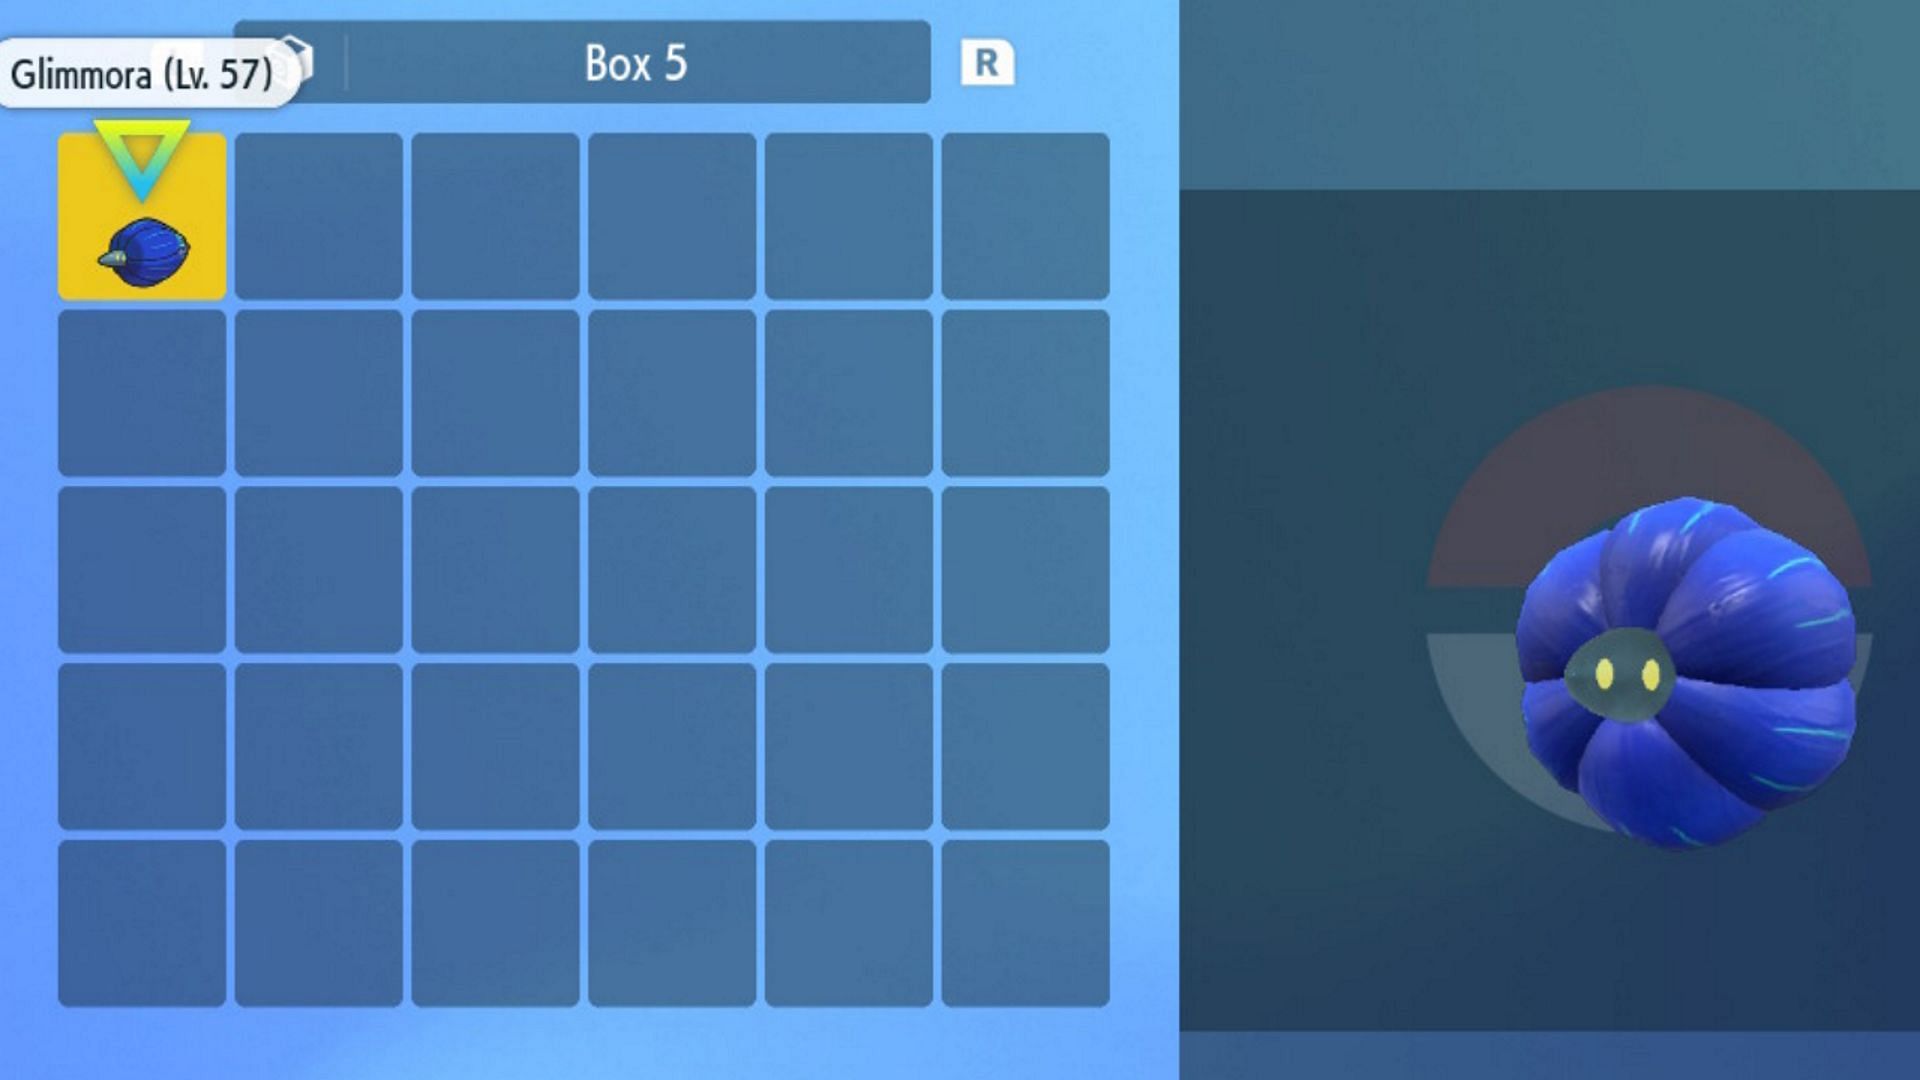 Pokémon Scarlet And Violet: There's An Easy Way To Get More Boxes